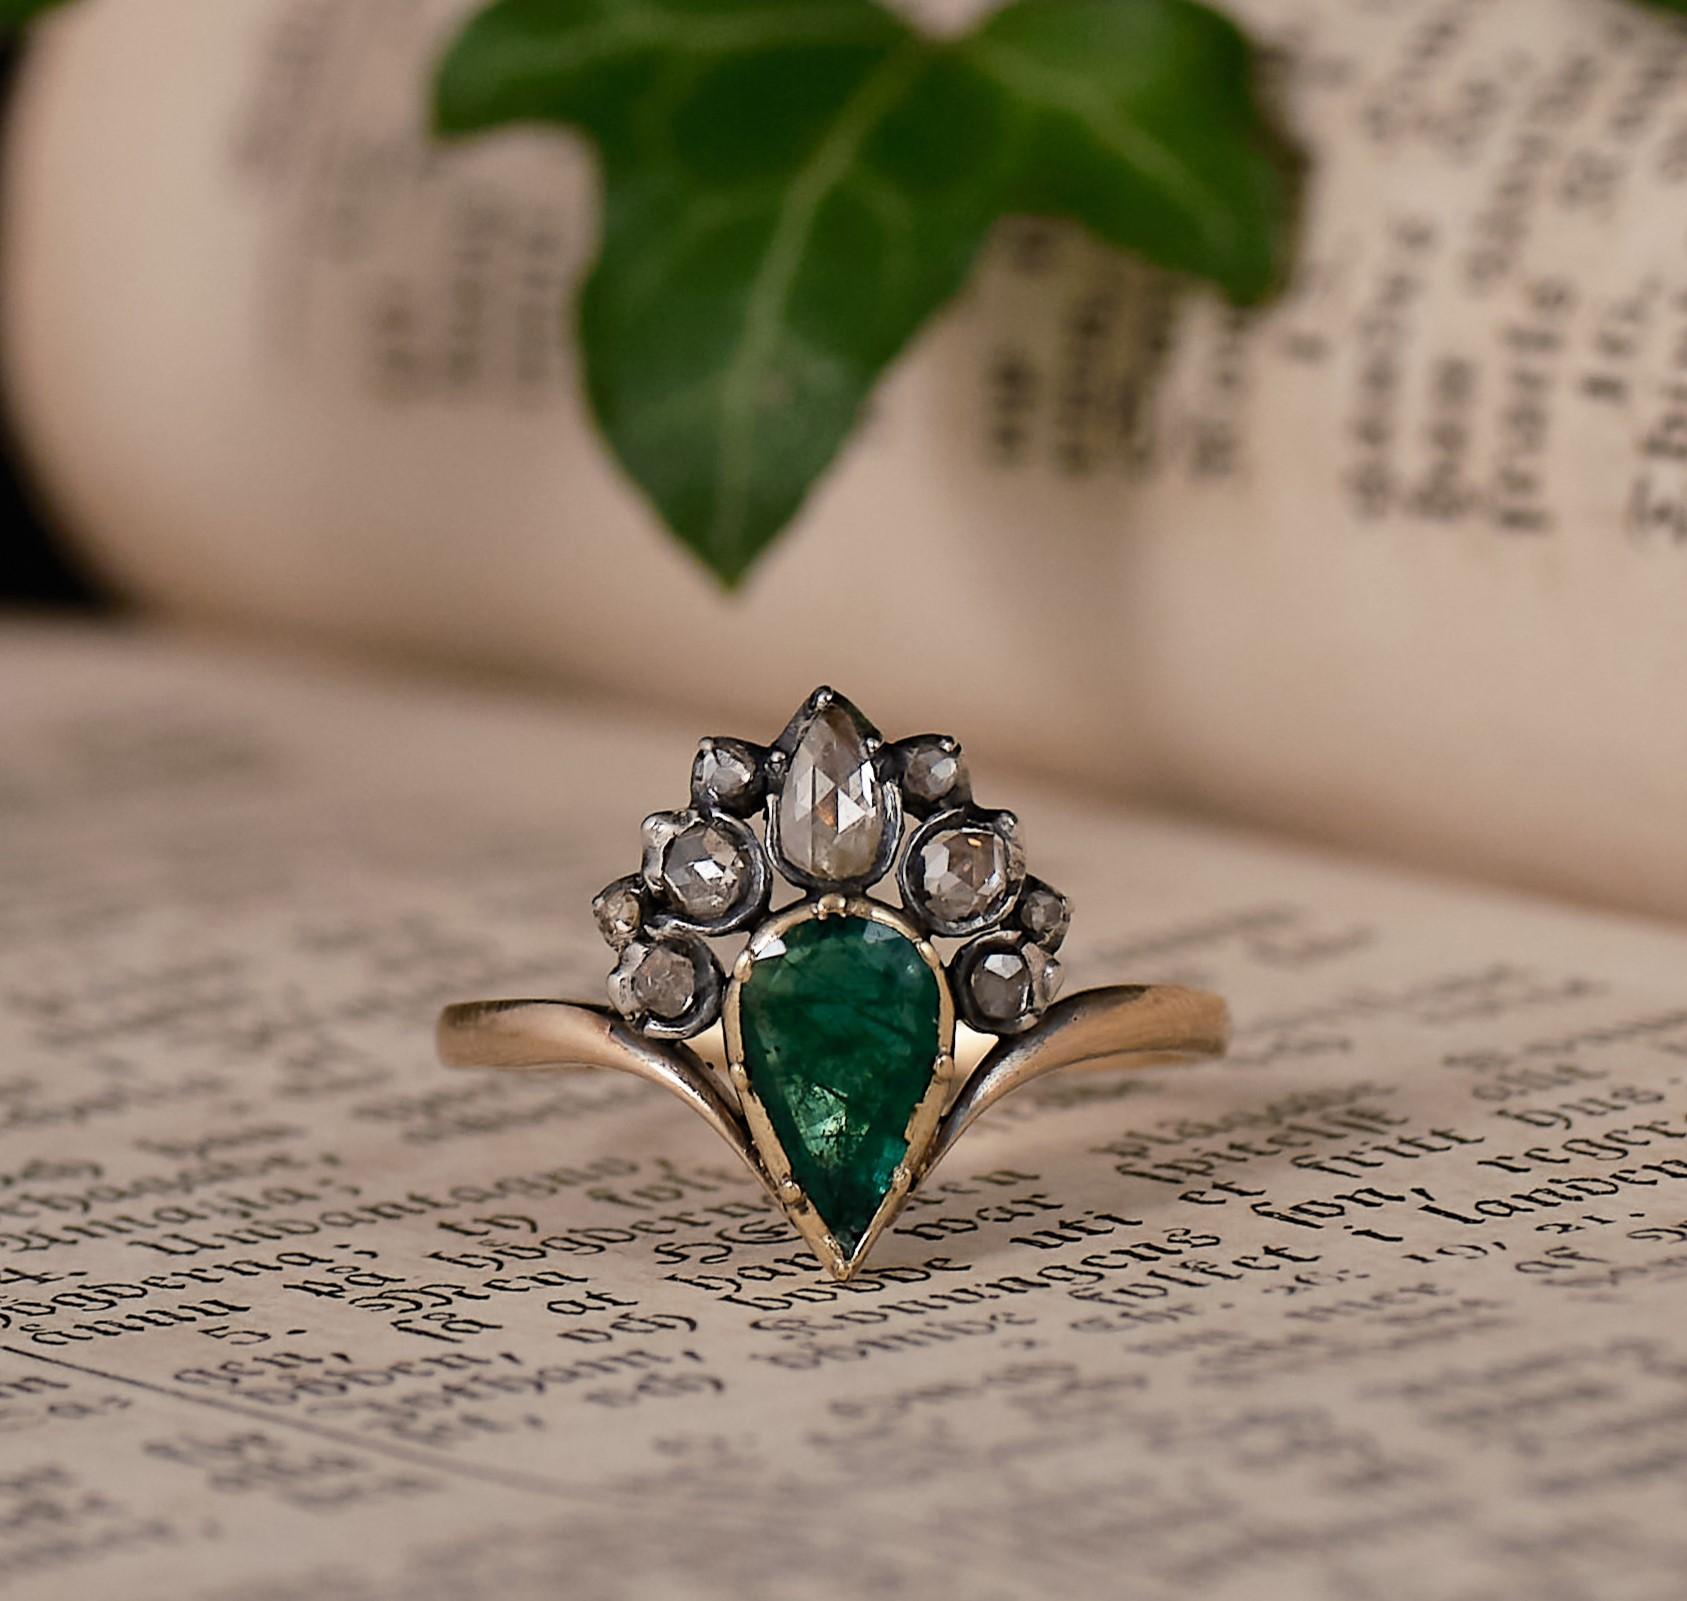 19th century flaming heart emerald and diamond ring

The heart aflame symbolizes the burning passion of undying love.

The heart motif refers to friendship, devotion and affection, although the most powerful and significant of all hearts in jewelry